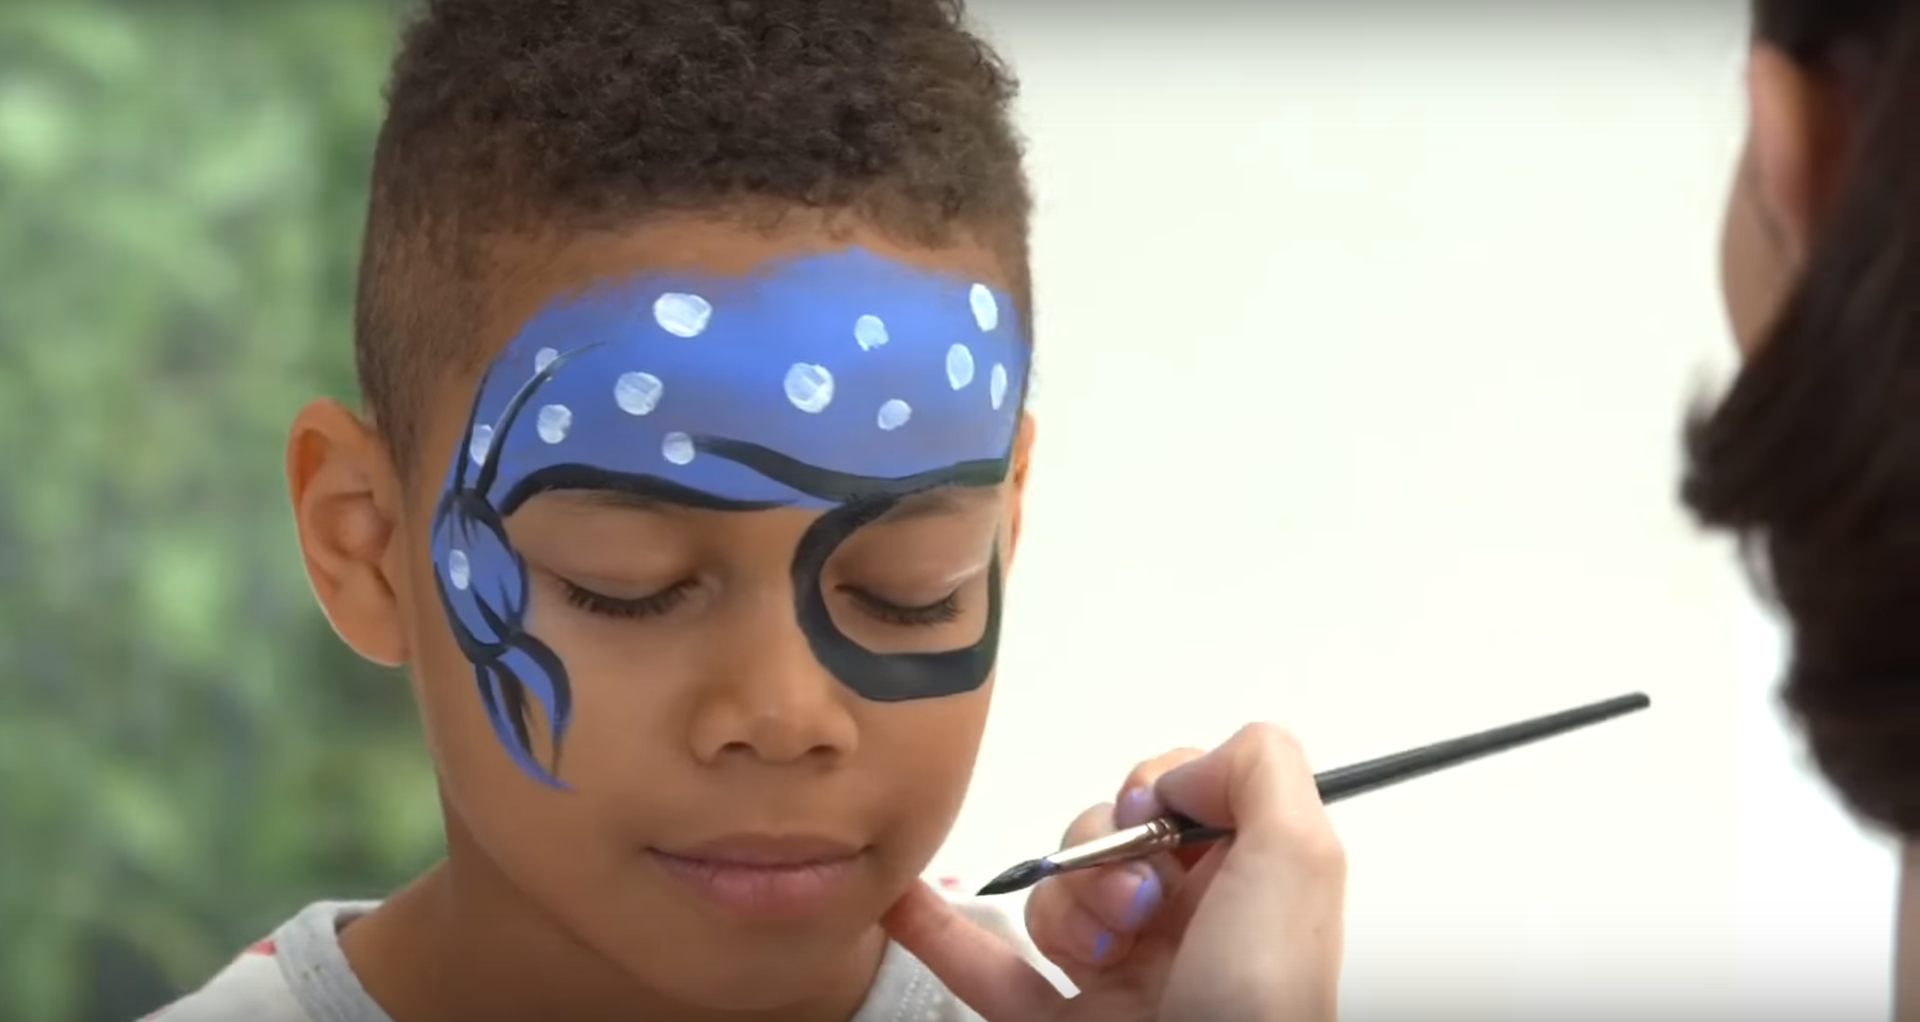 Things to learn to do as a parent: Great face painting tutorials and videos from Snazaroo